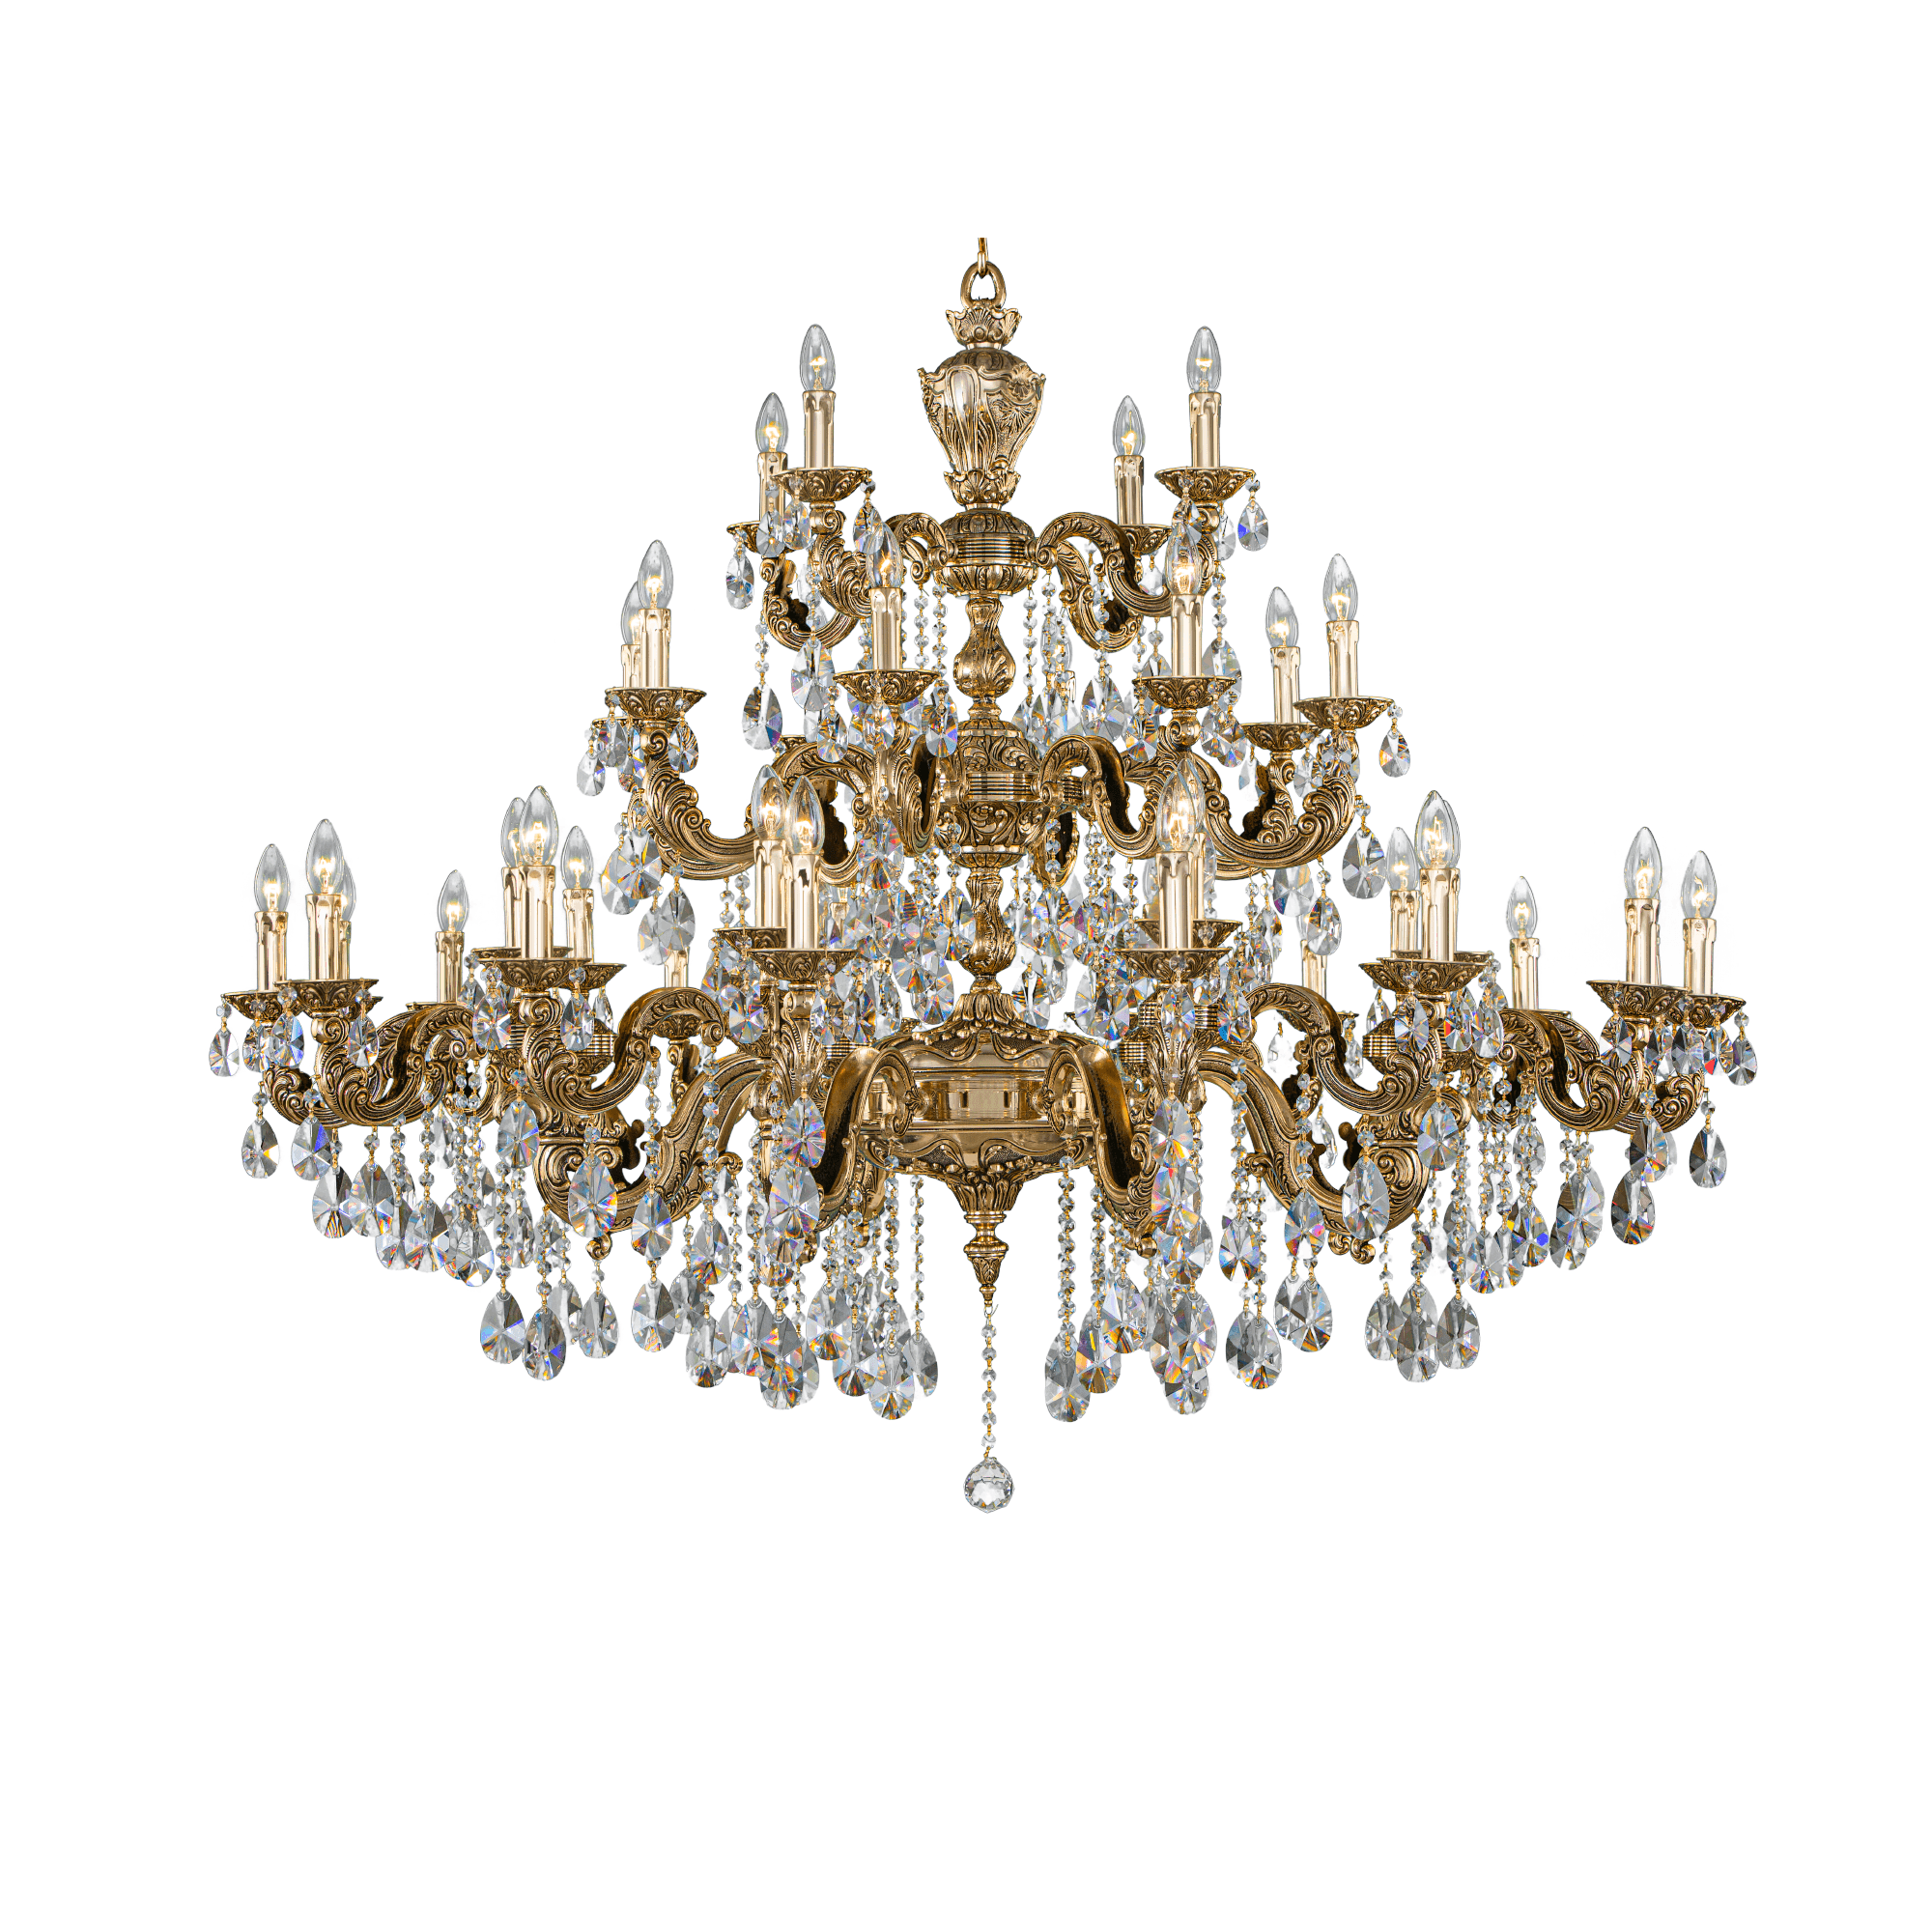 Asfour-Crystal-Lighting-Brass-Collection-Brass-Chandelier-36-Bulbs-Gold-Ox